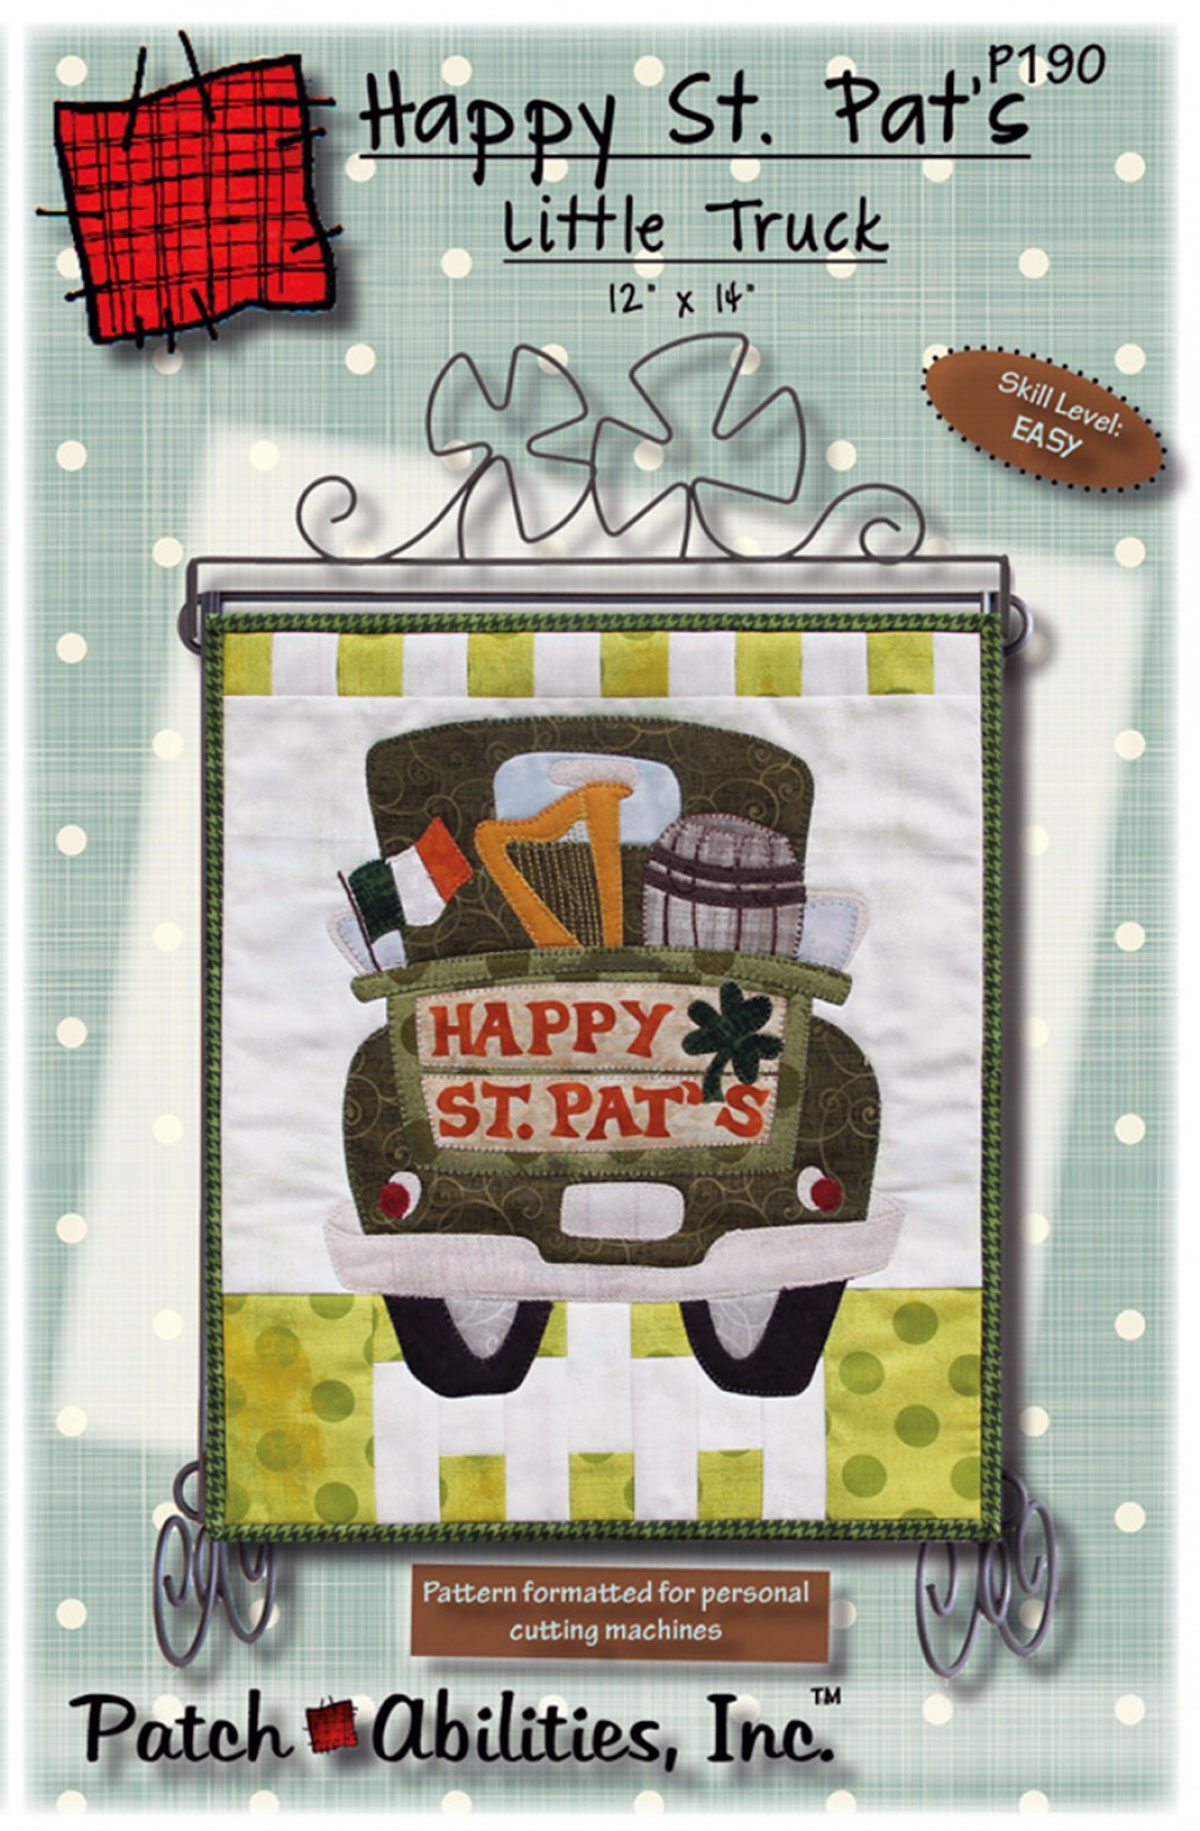 Happy-St-Pats-Little-Truck--quilt-sewing-pattern-Patch-Abilities-front